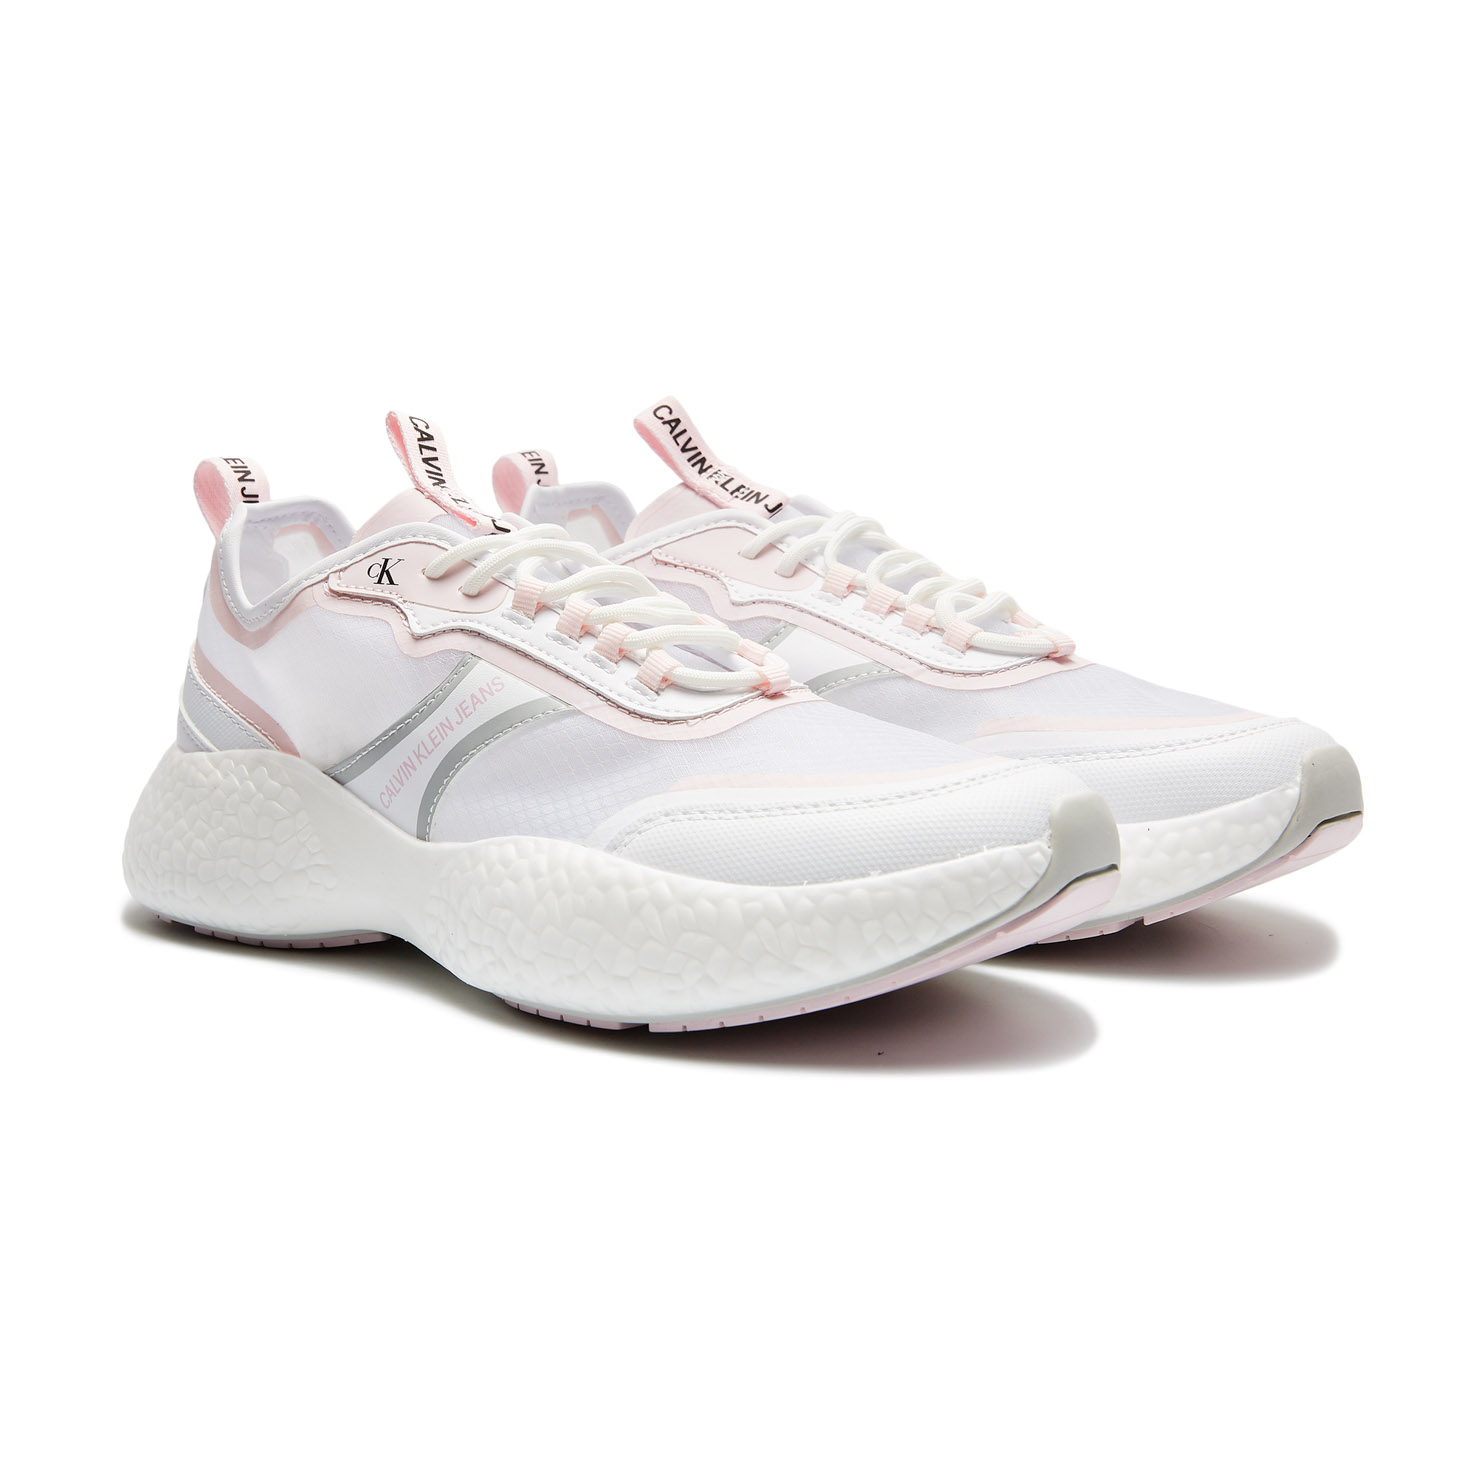 RUNNER SNEAKER LACEUP PU-NY CALVIN KLEIN, размер 36, цвет белый CKYW0YW00086 - фото 2